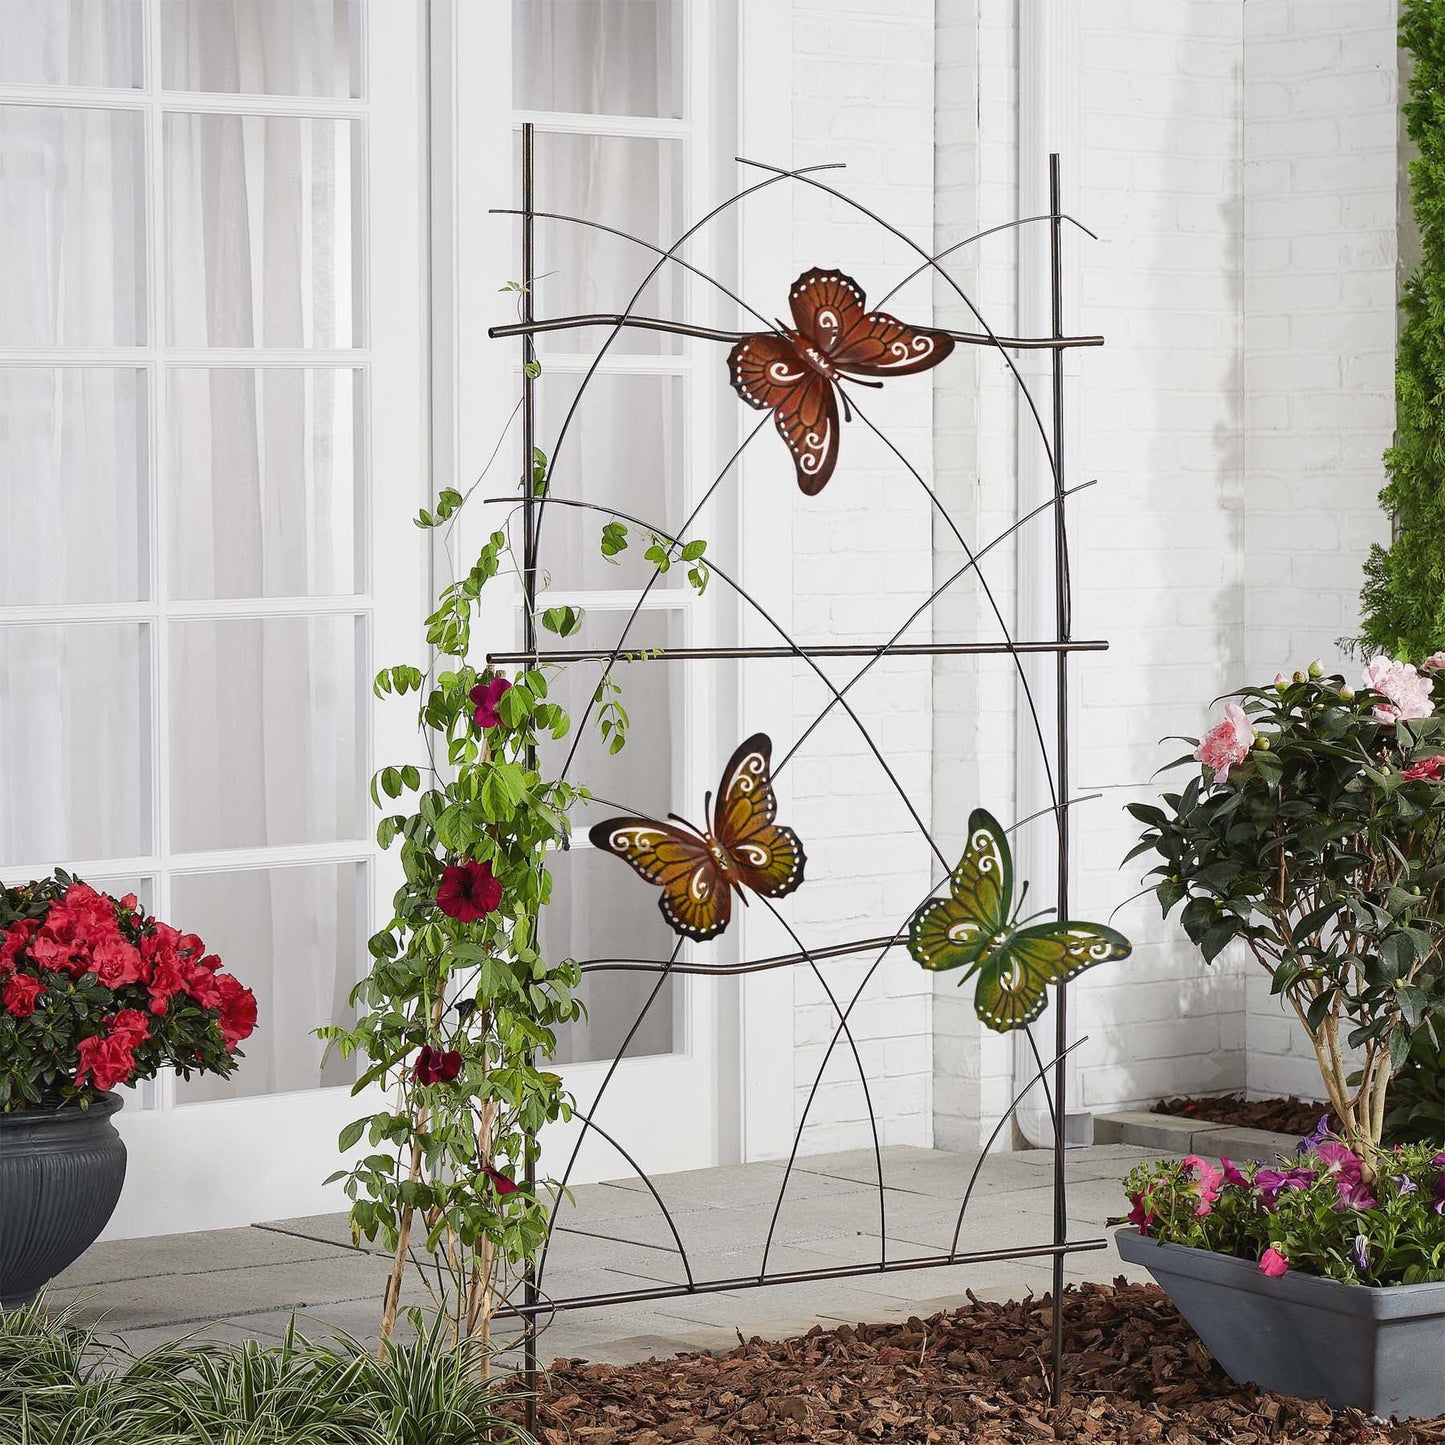 Painted Metal Butterfly Wall Decor